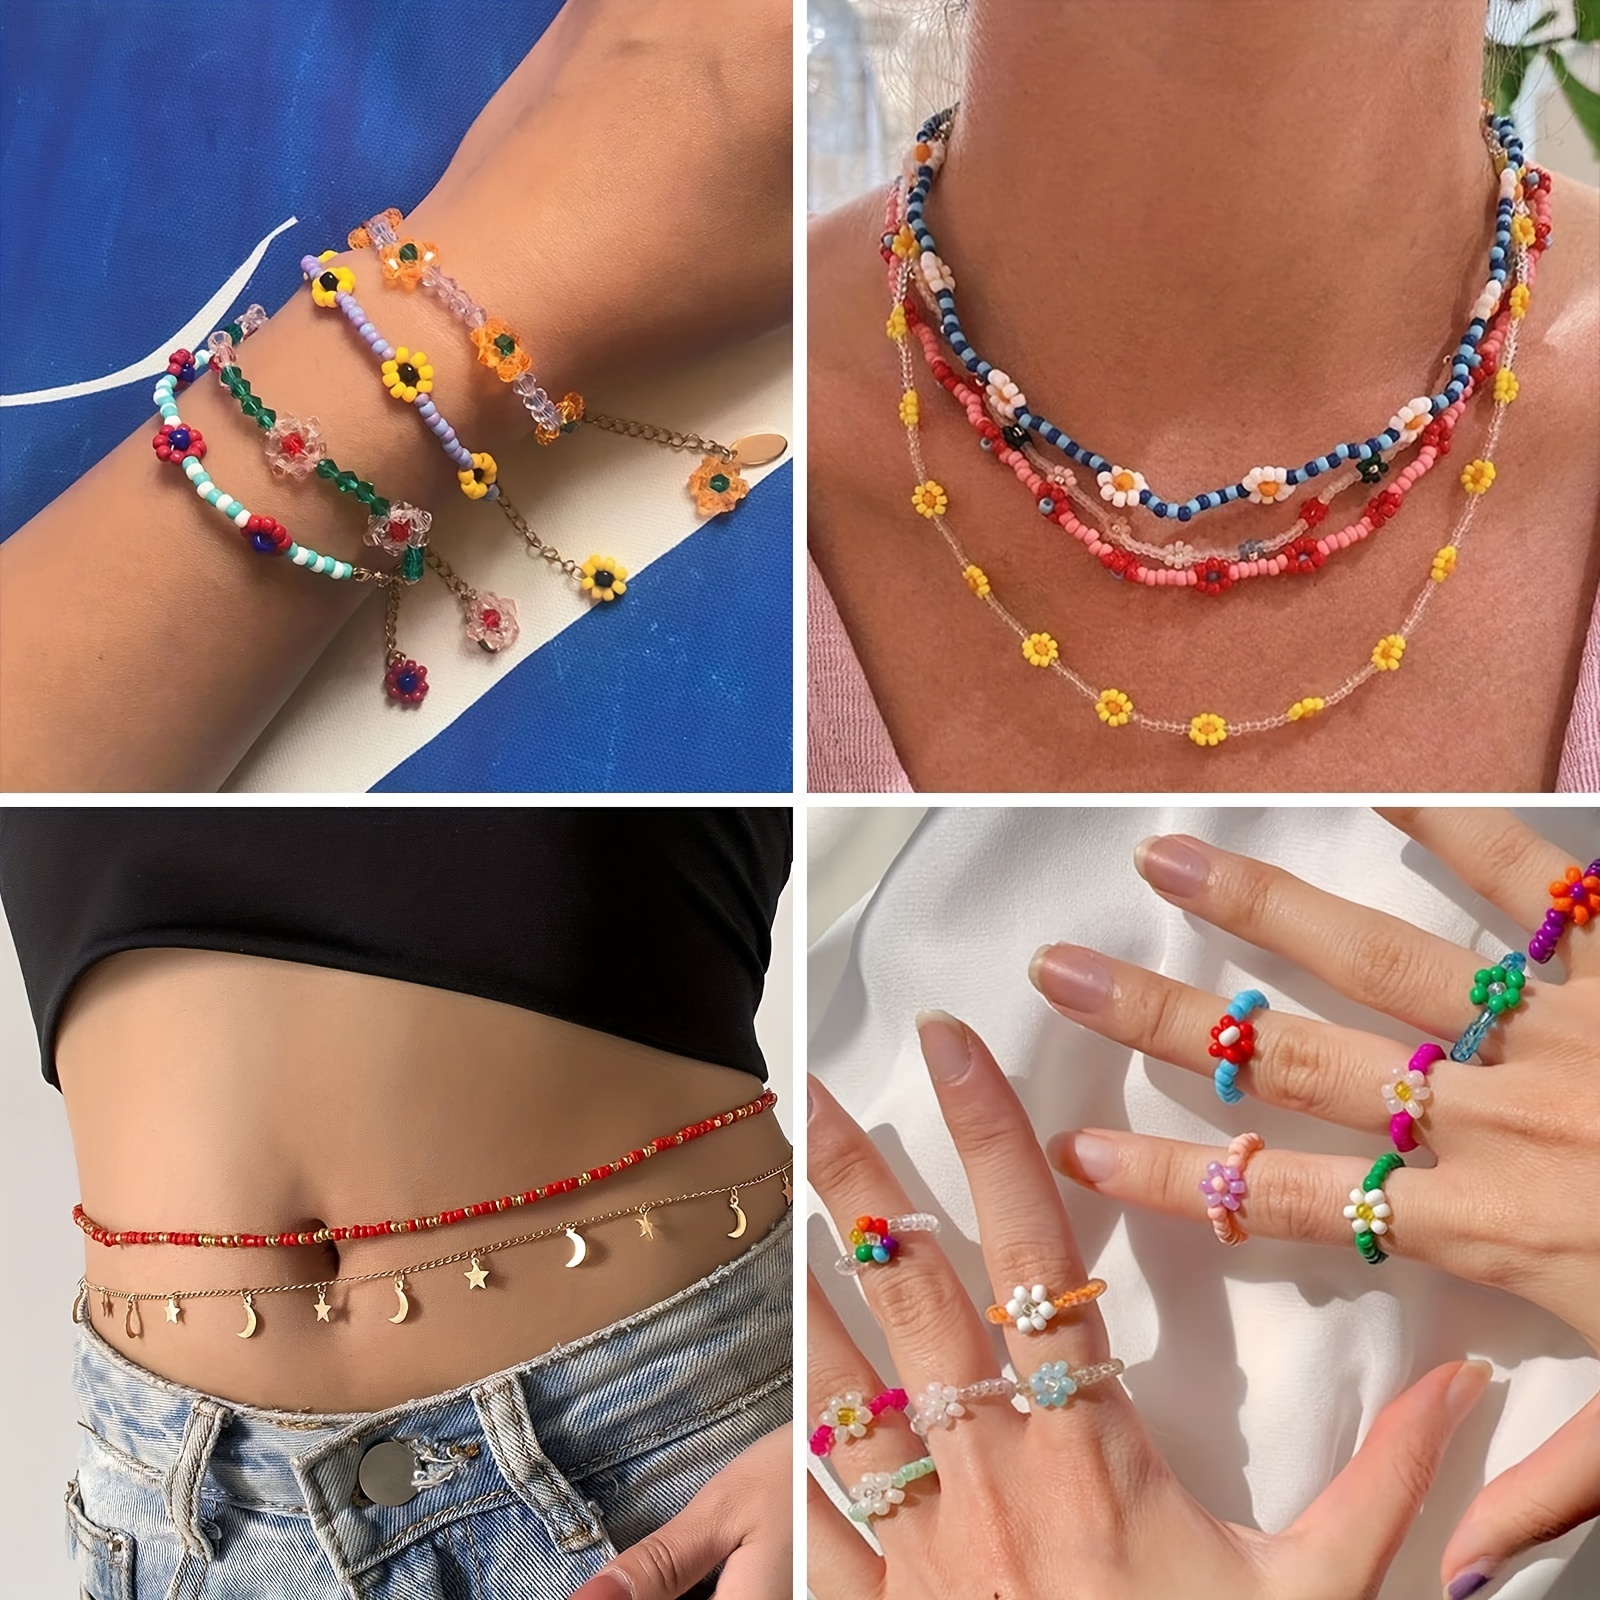 Glass Seed Beads And Letter Beads For Friendship Bracelets - Temu